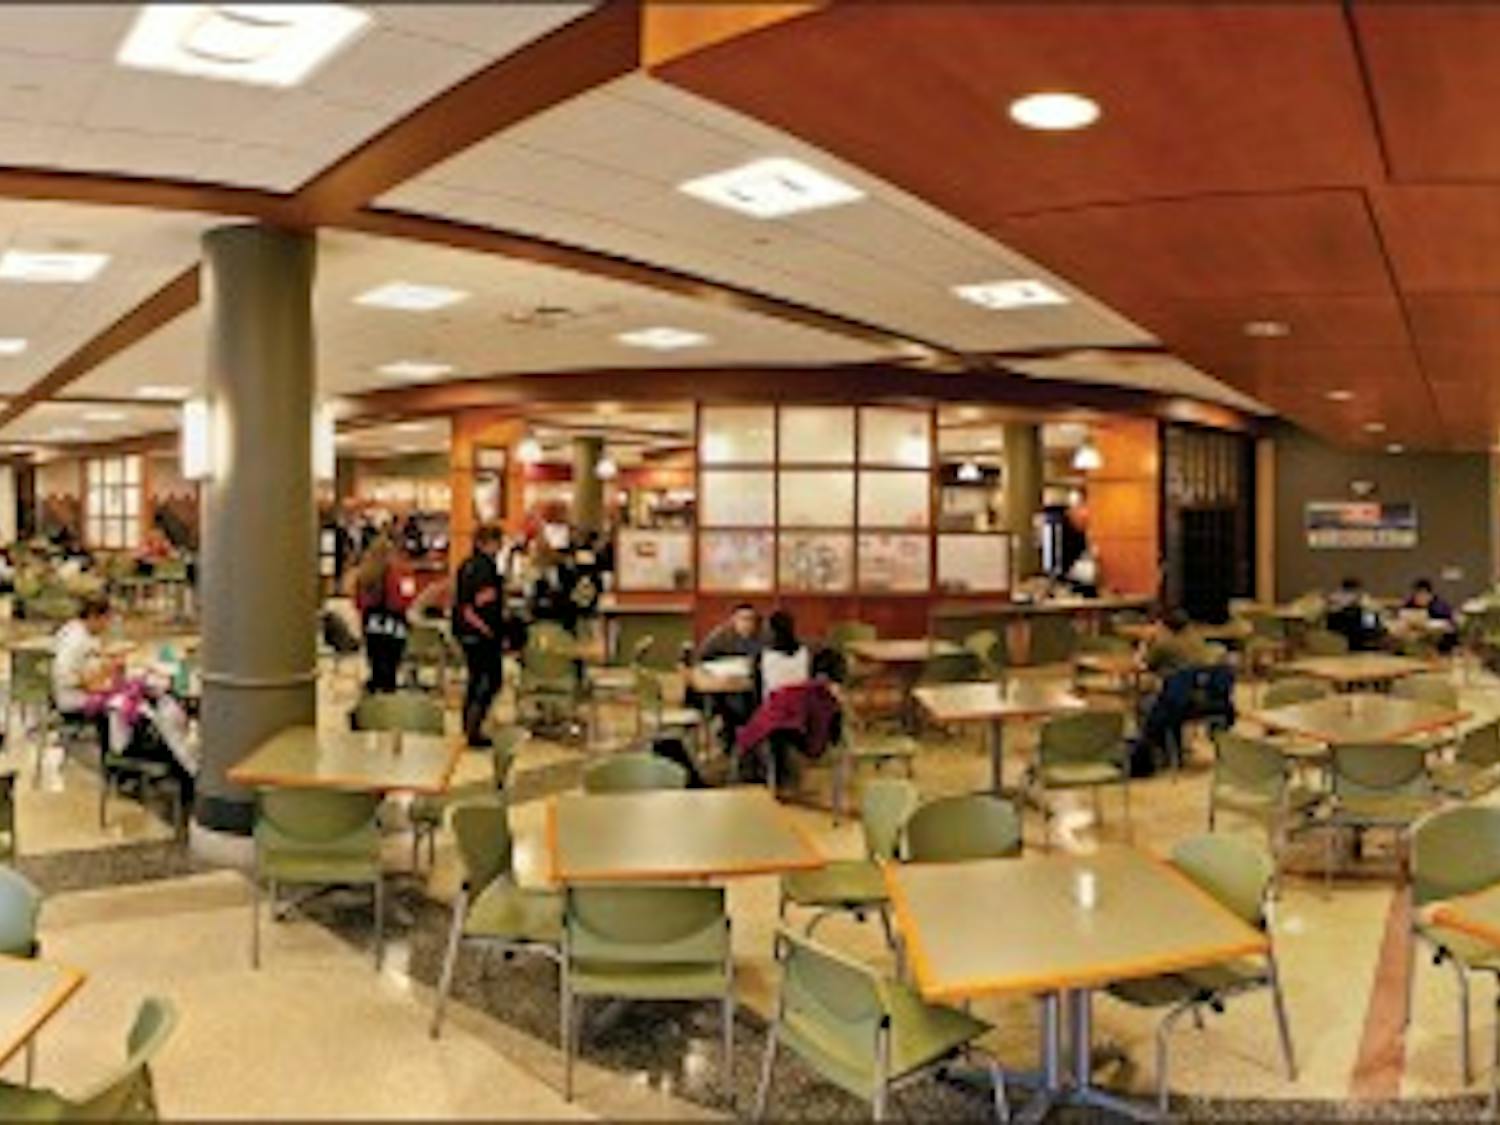 Baker University Center serves as hotspot for student activity, offers variety of resources  